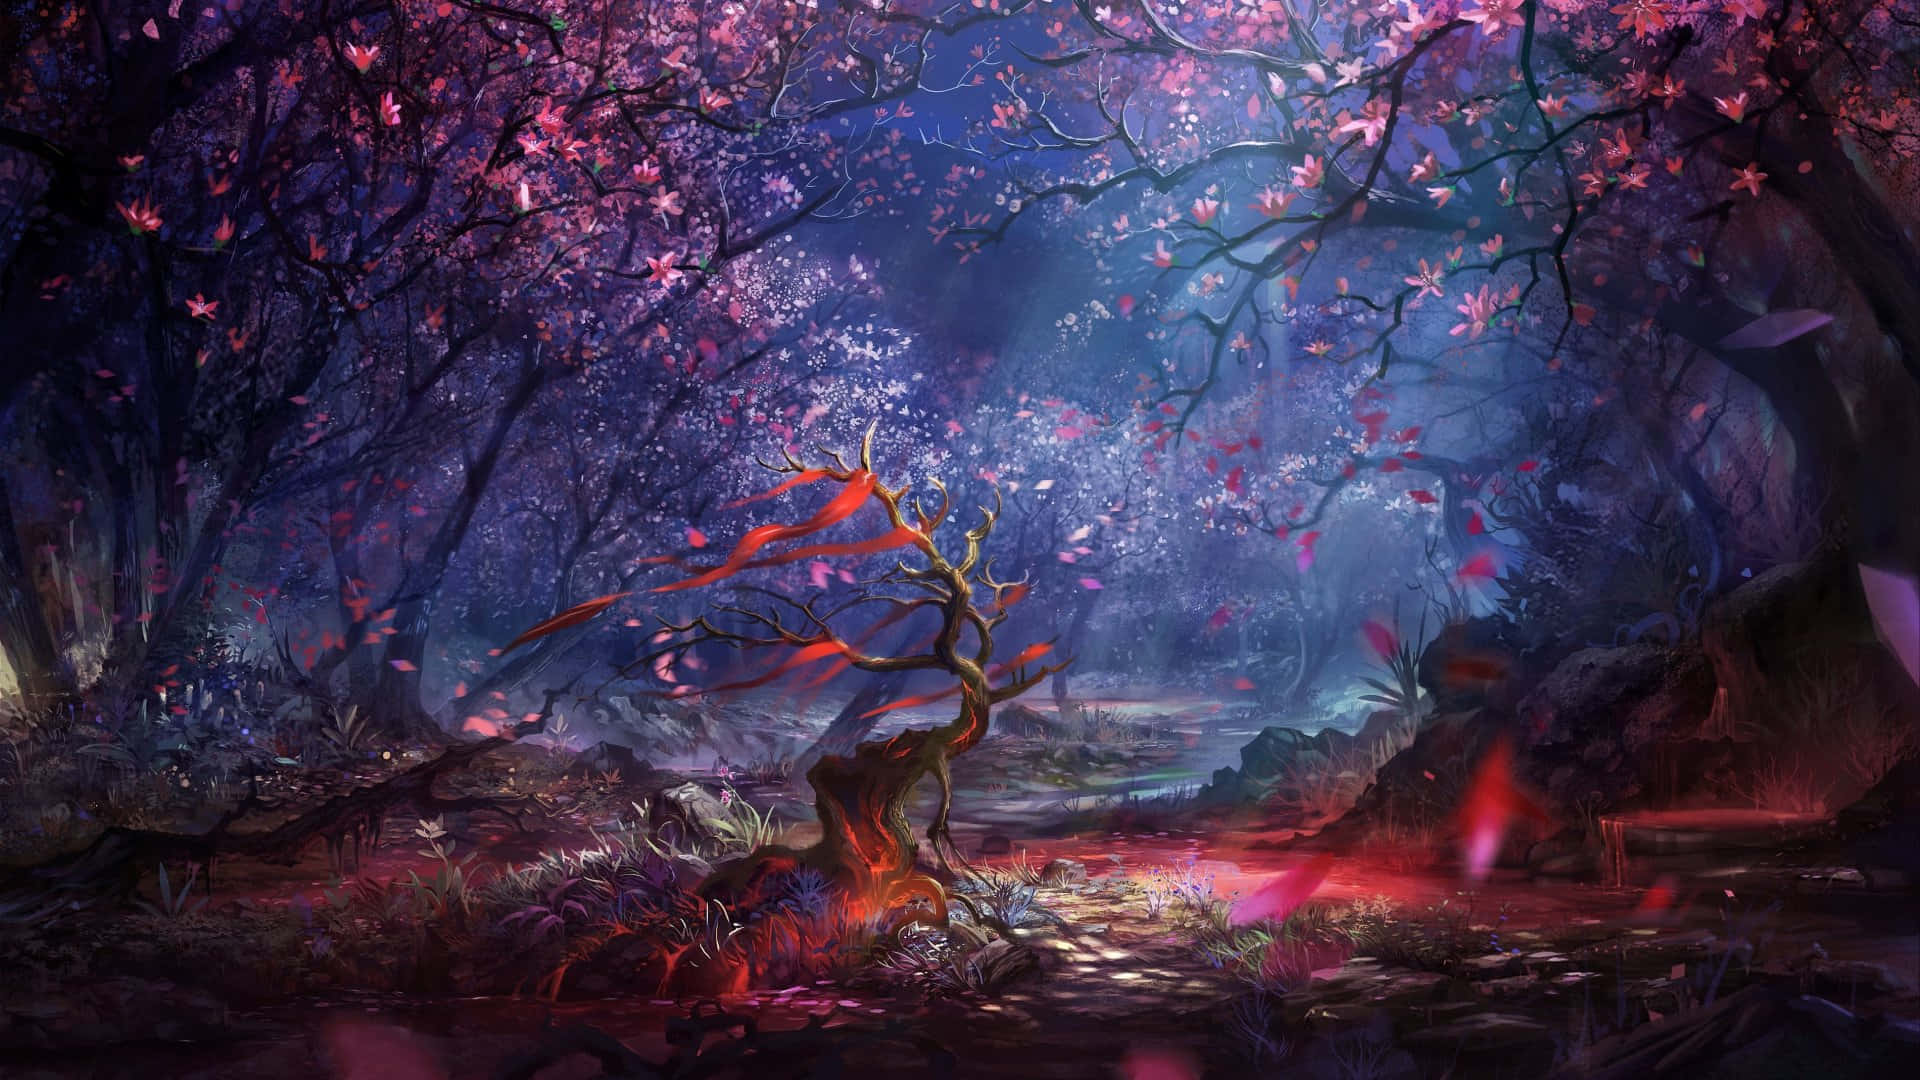 "Discover the hidden beauty of the Magical Forest"